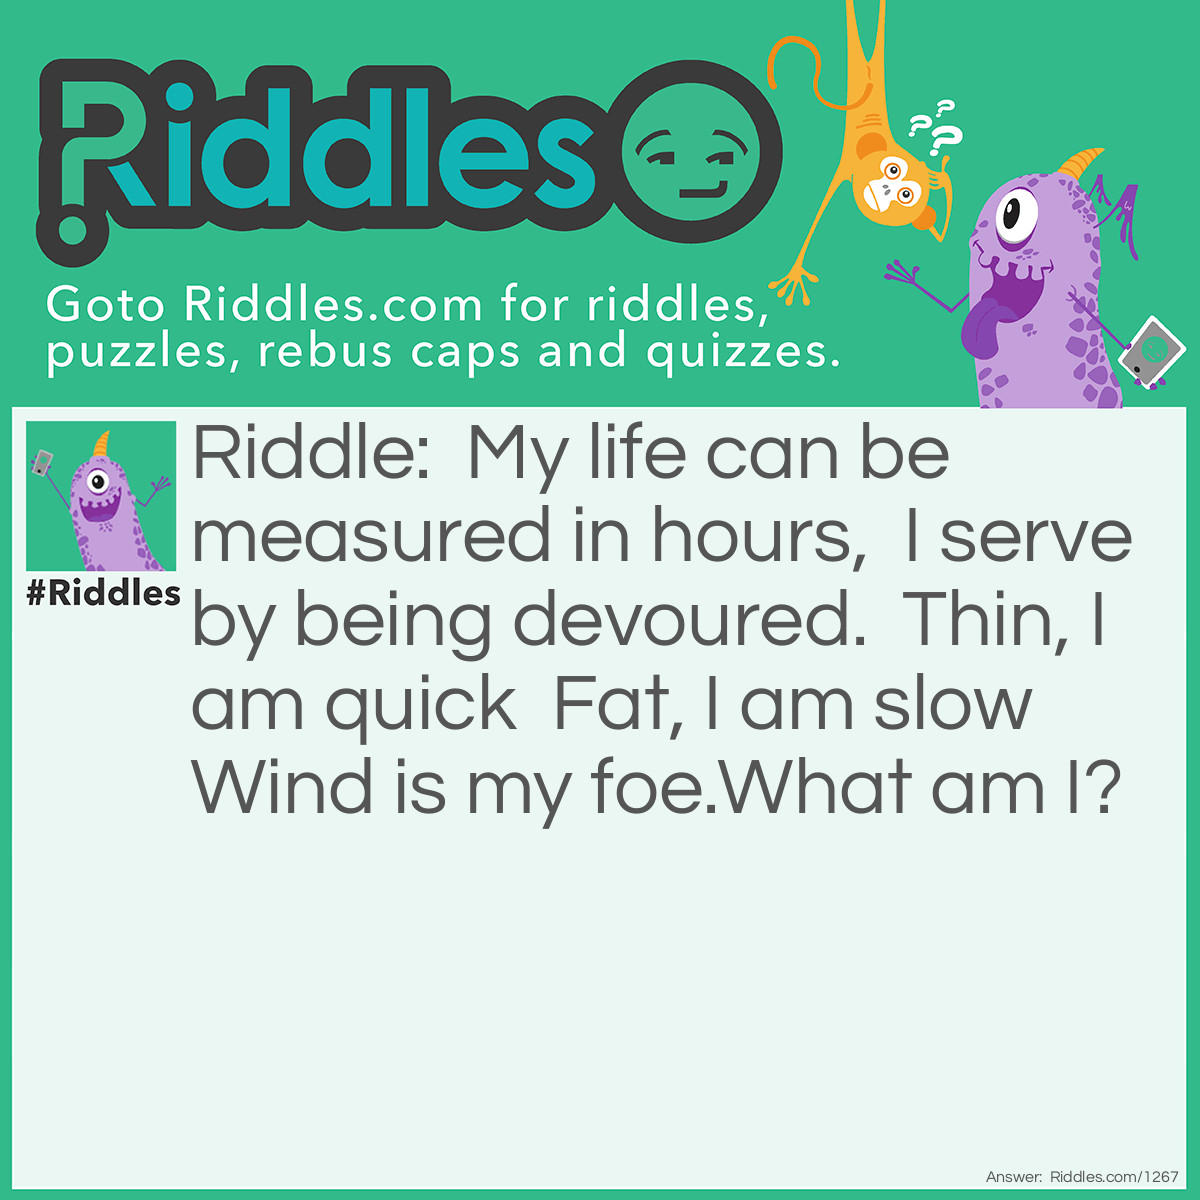 Riddle: My life can be measured in hours,  I serve by being devoured.  Thin, I am quick  Fat, I am slow  Wind is my foe.What am I? Answer: A candle.